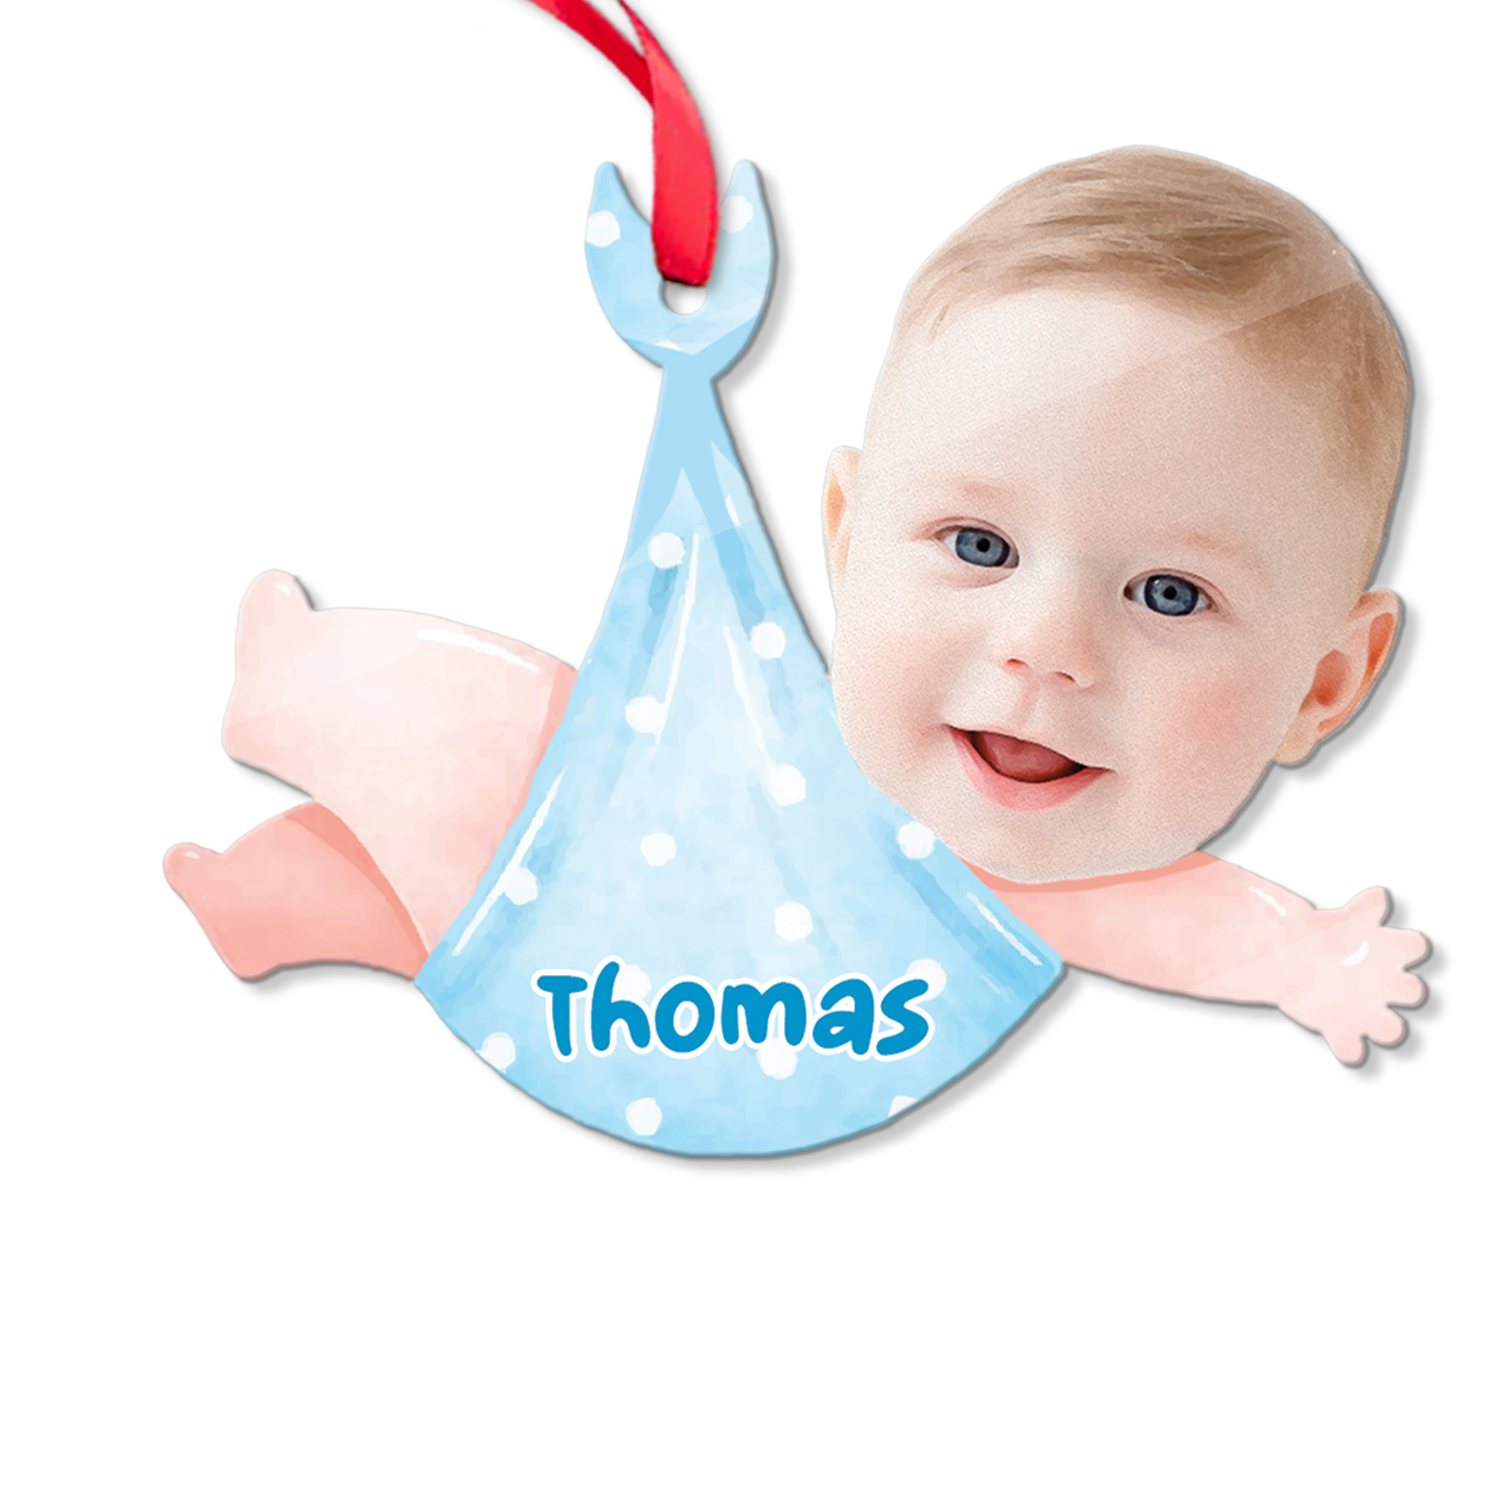 Face From Photo, Ornament For Baby, Christmas Baby Towel, Personalized Name And Text, Christmas Shape Ornament 2 Sides